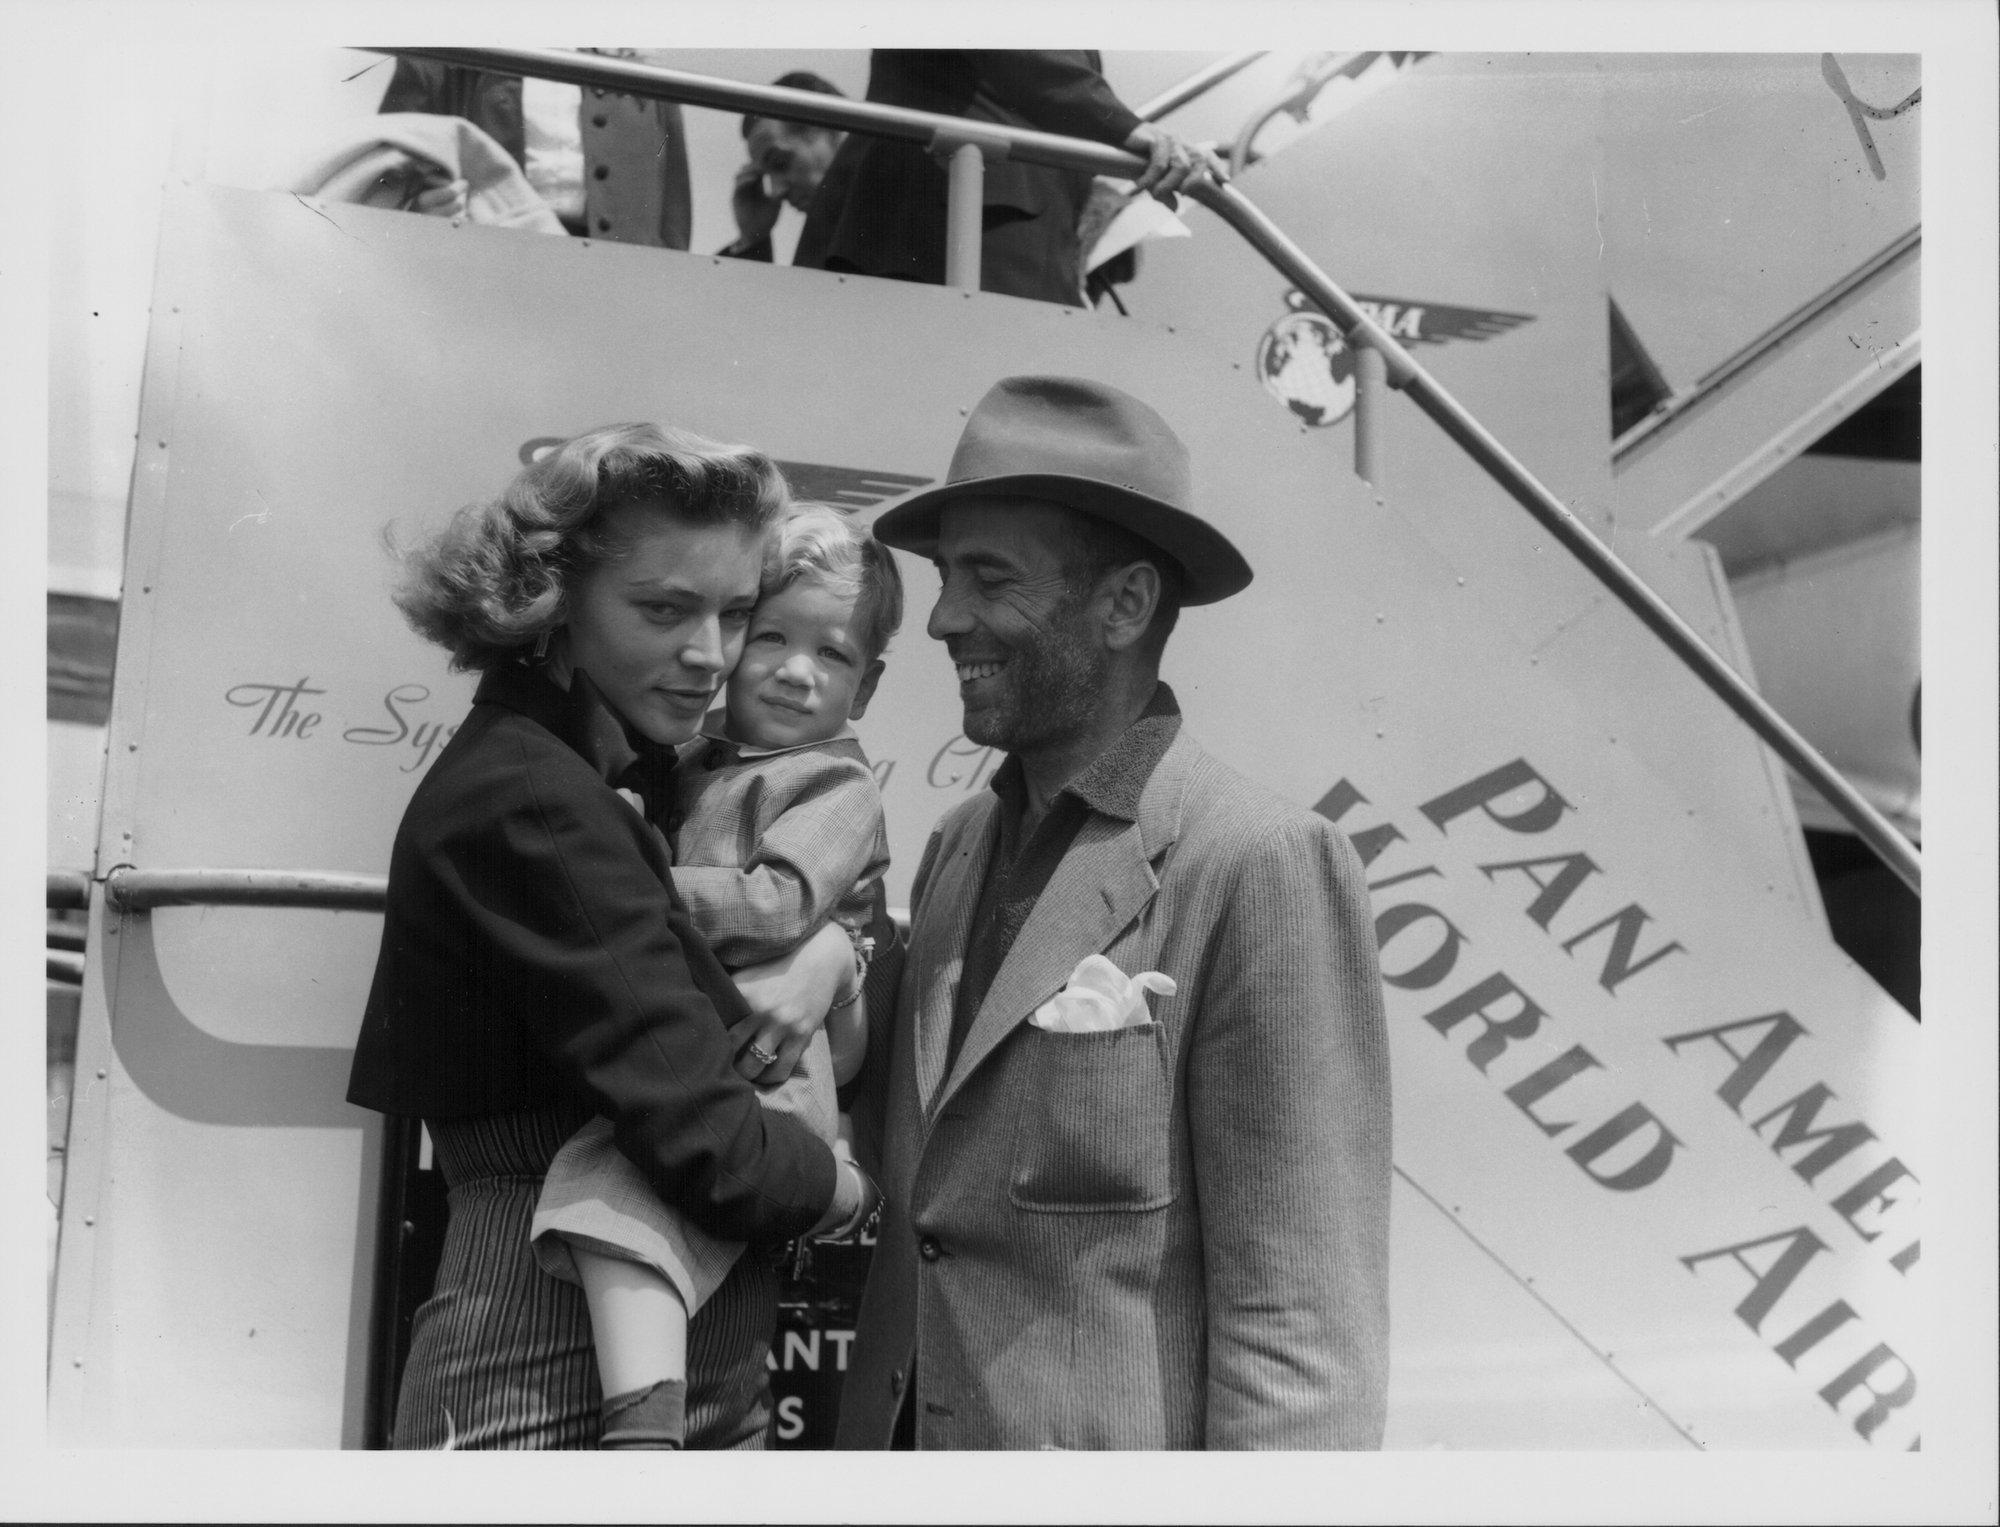 (L-R) Lauren Bacall holding a baby Stephen Humphrey Bogart, and Humphrey Bogart in front of a ship, smiling, in black and white